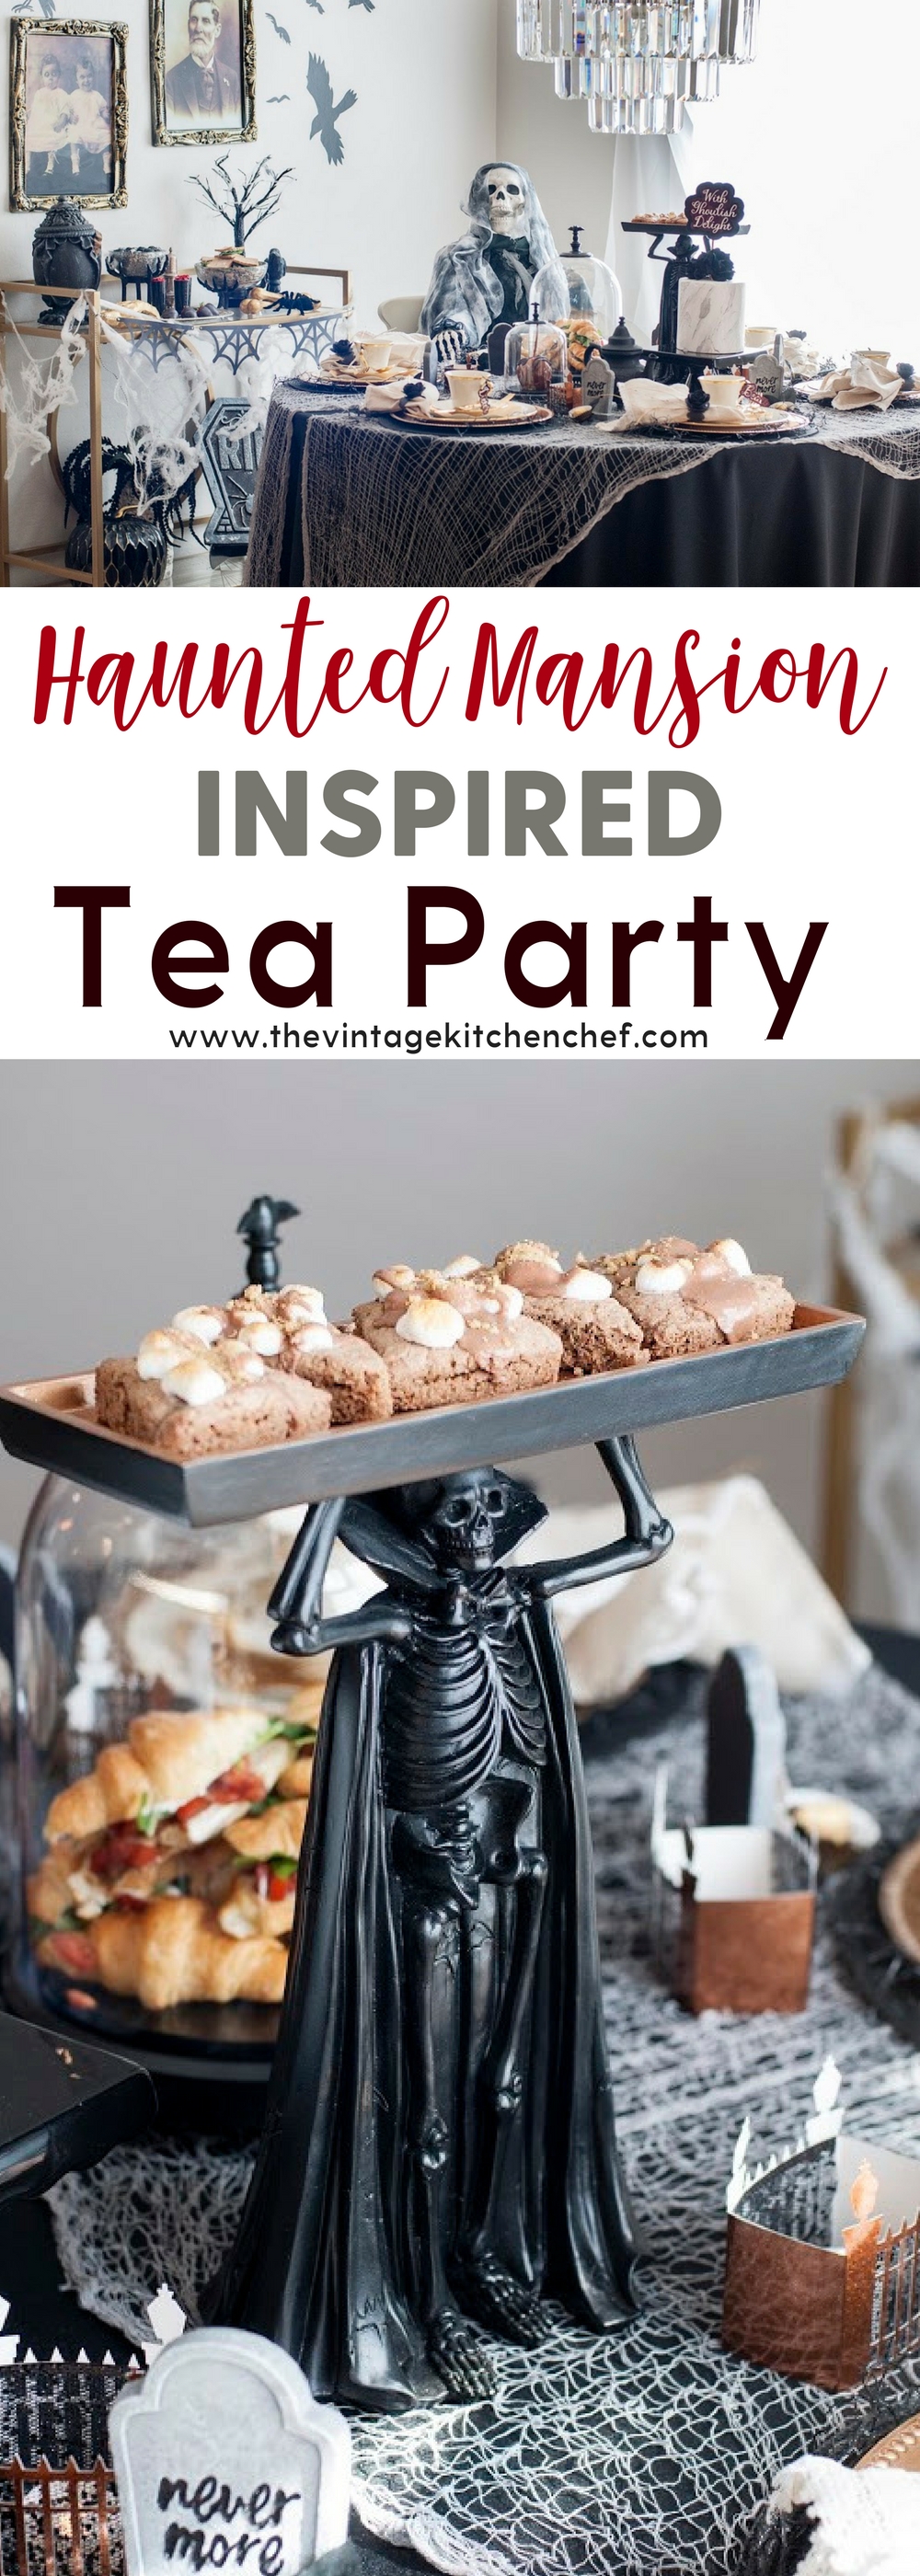 What's more fun than a Halloween tea party? A Haunted Mansion Inspired Tea Party, of course, complete with ghosts, ghouls, and delicious treats!